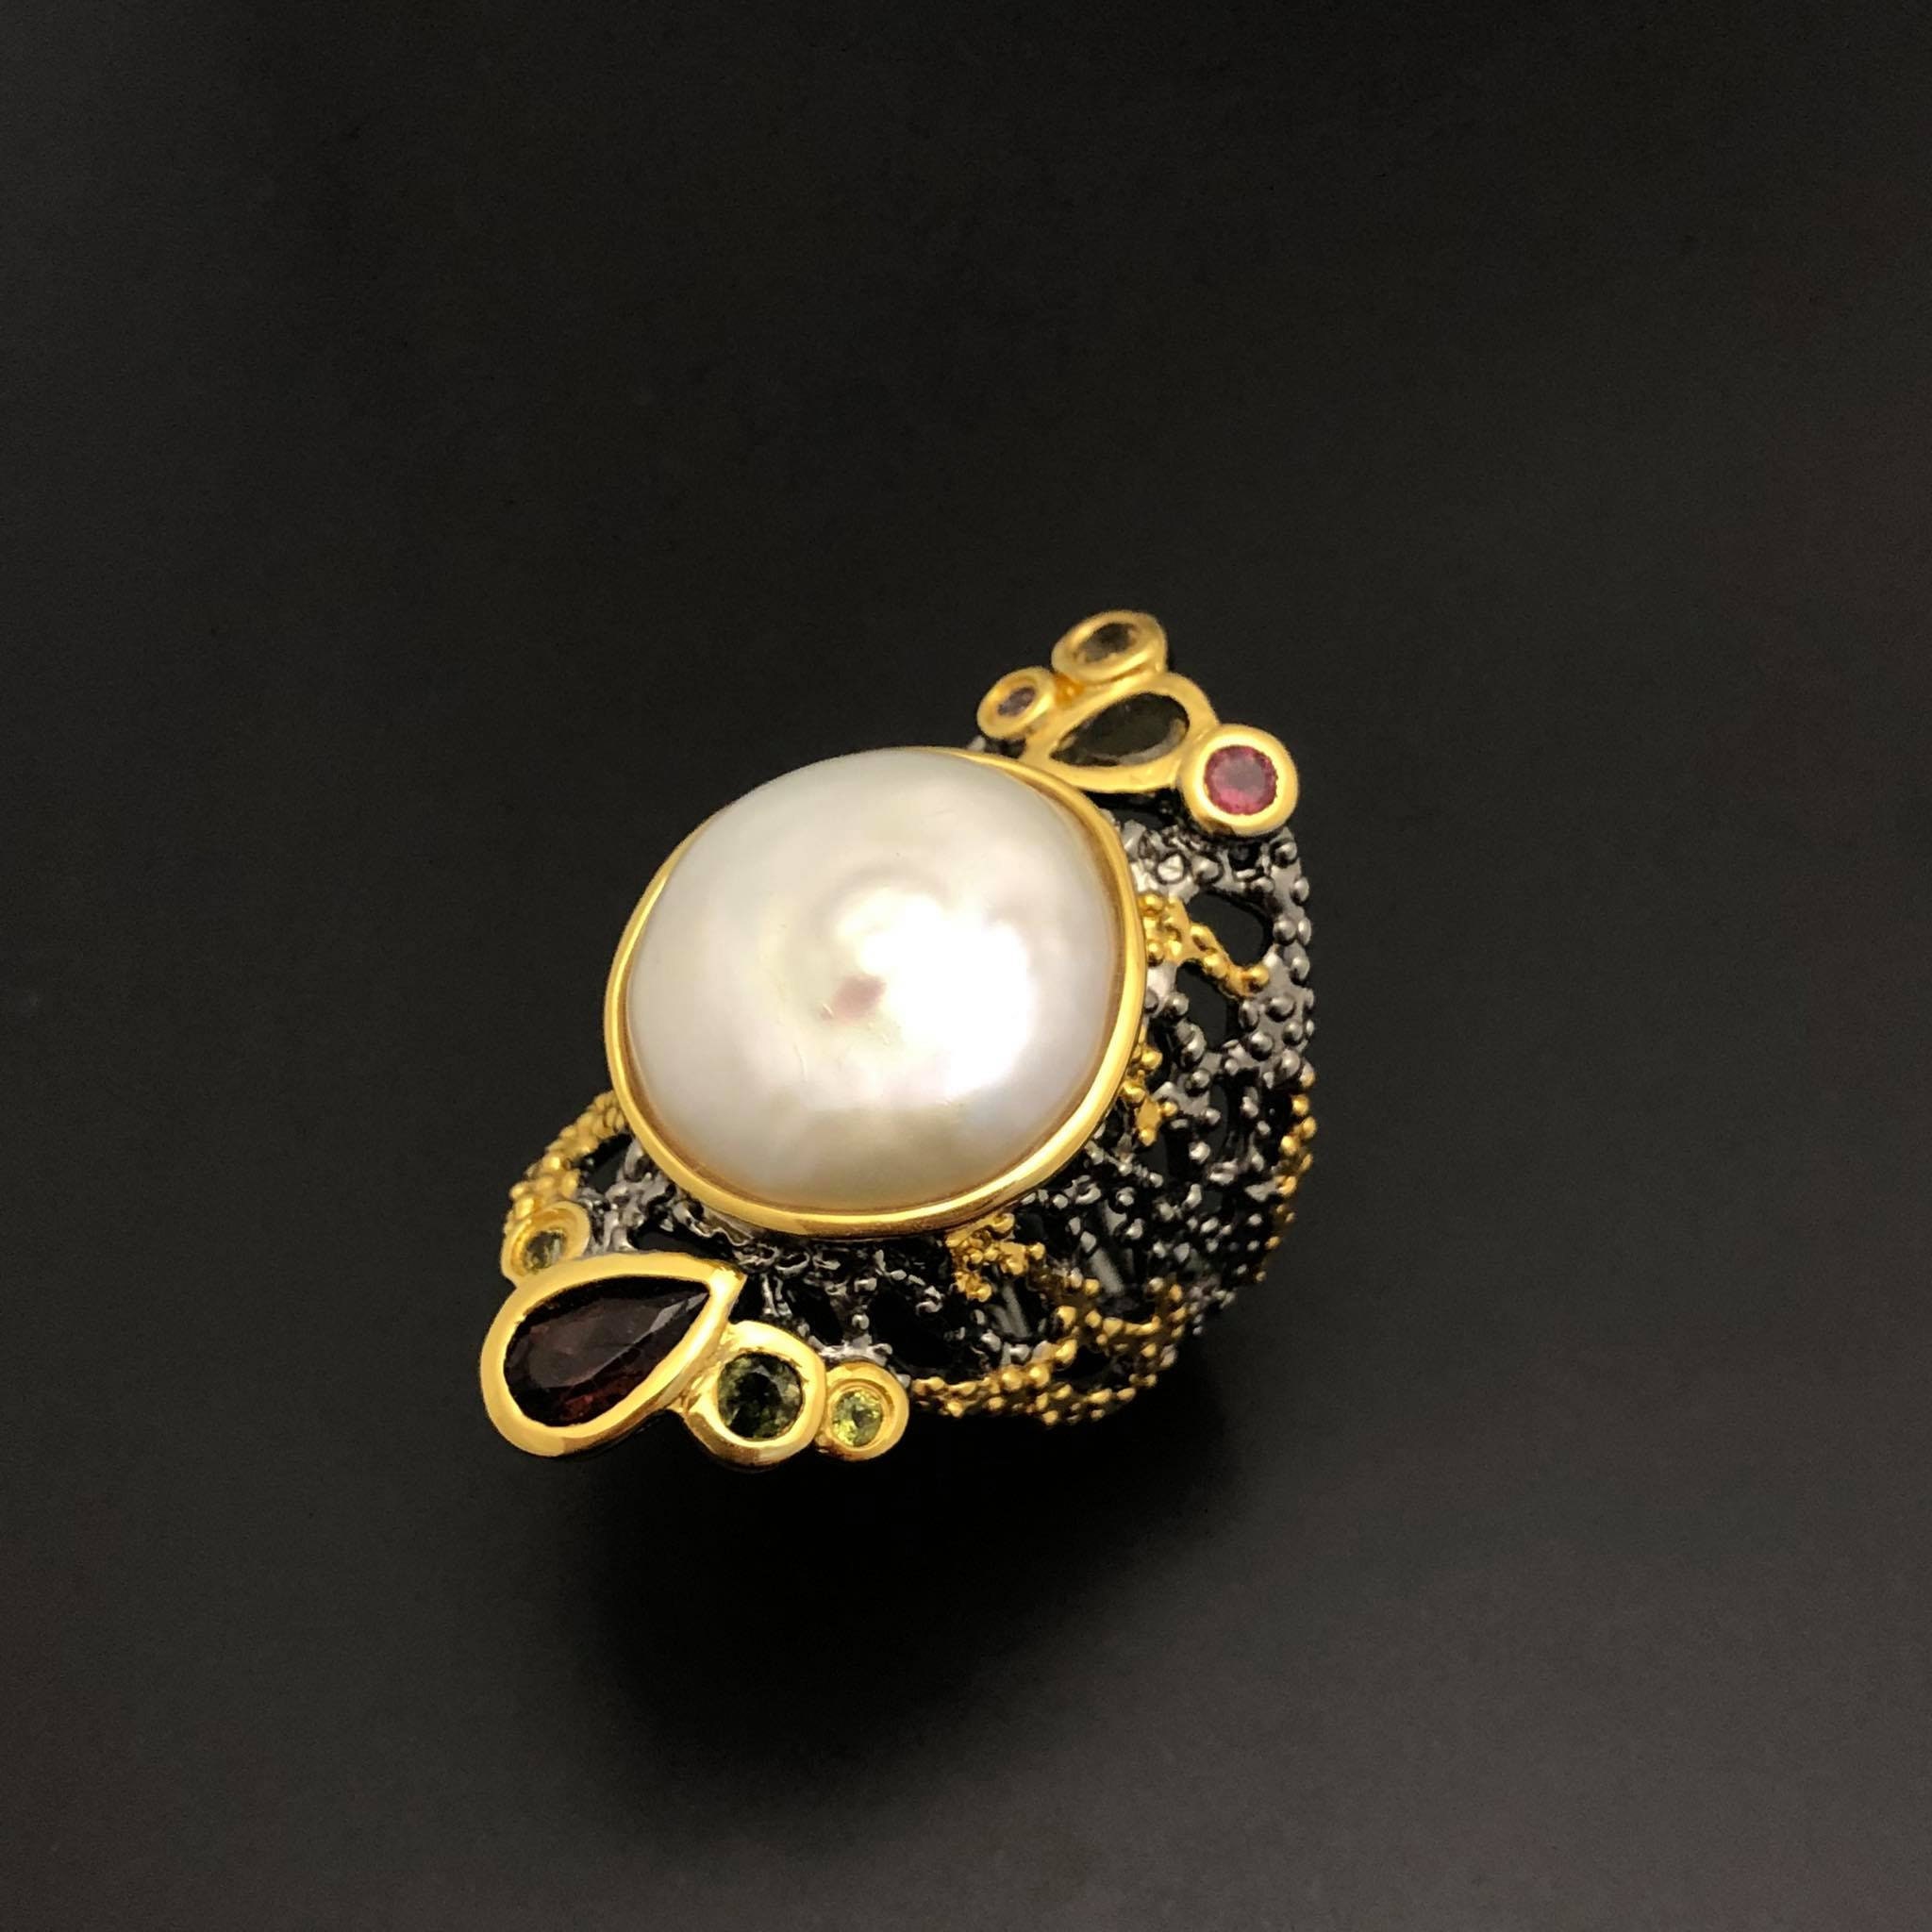 Vintage Design Baroque Pearl Ring Statement Pearl Ring 22ct | Etsy